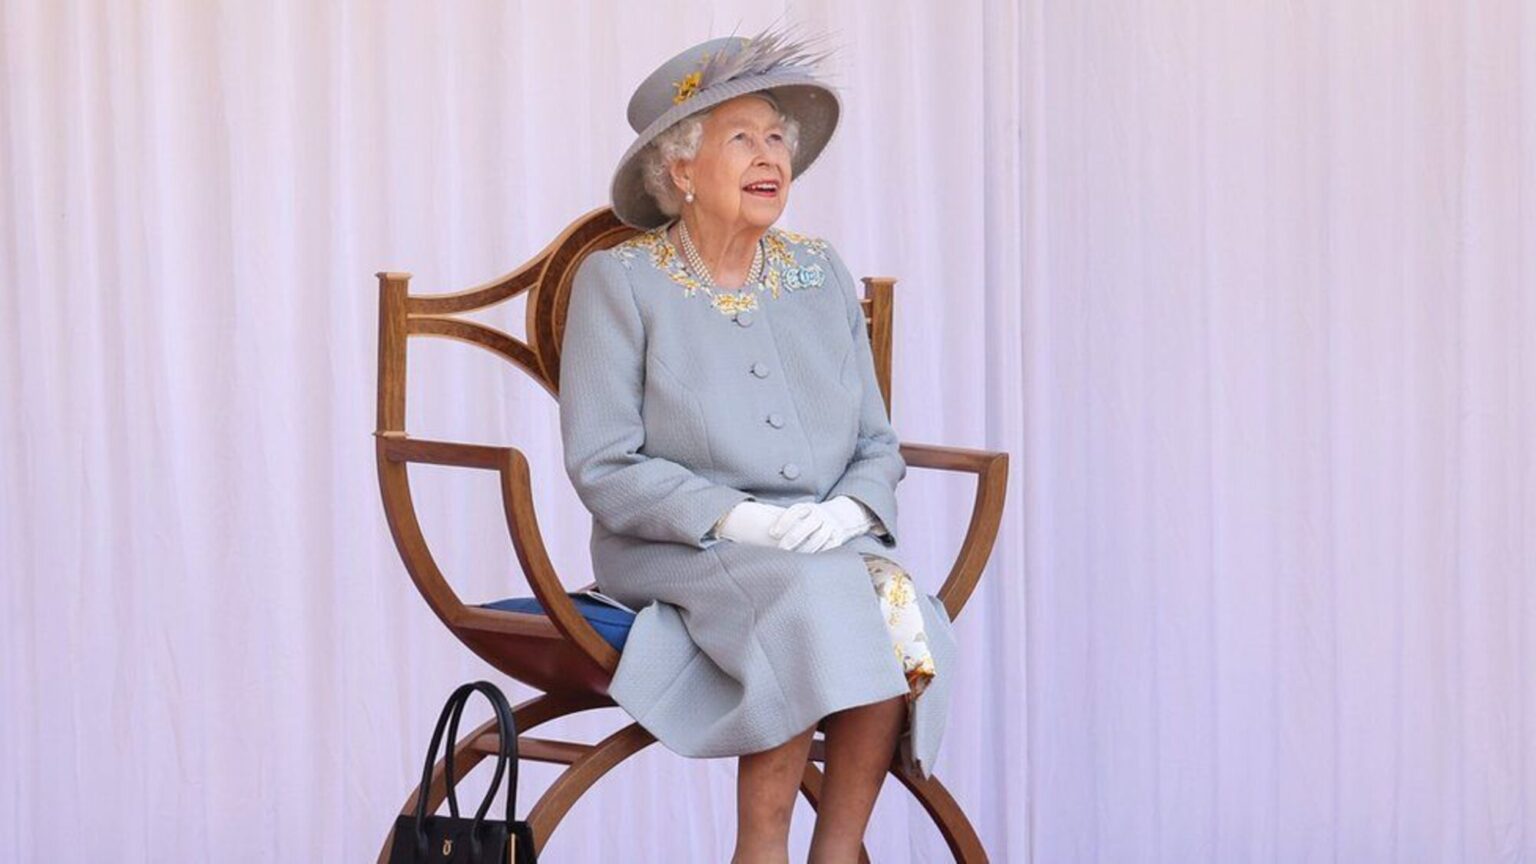 Queen Elizabeth II celebrated her 95th birthday. Look through the pictures of her birthday celebration.